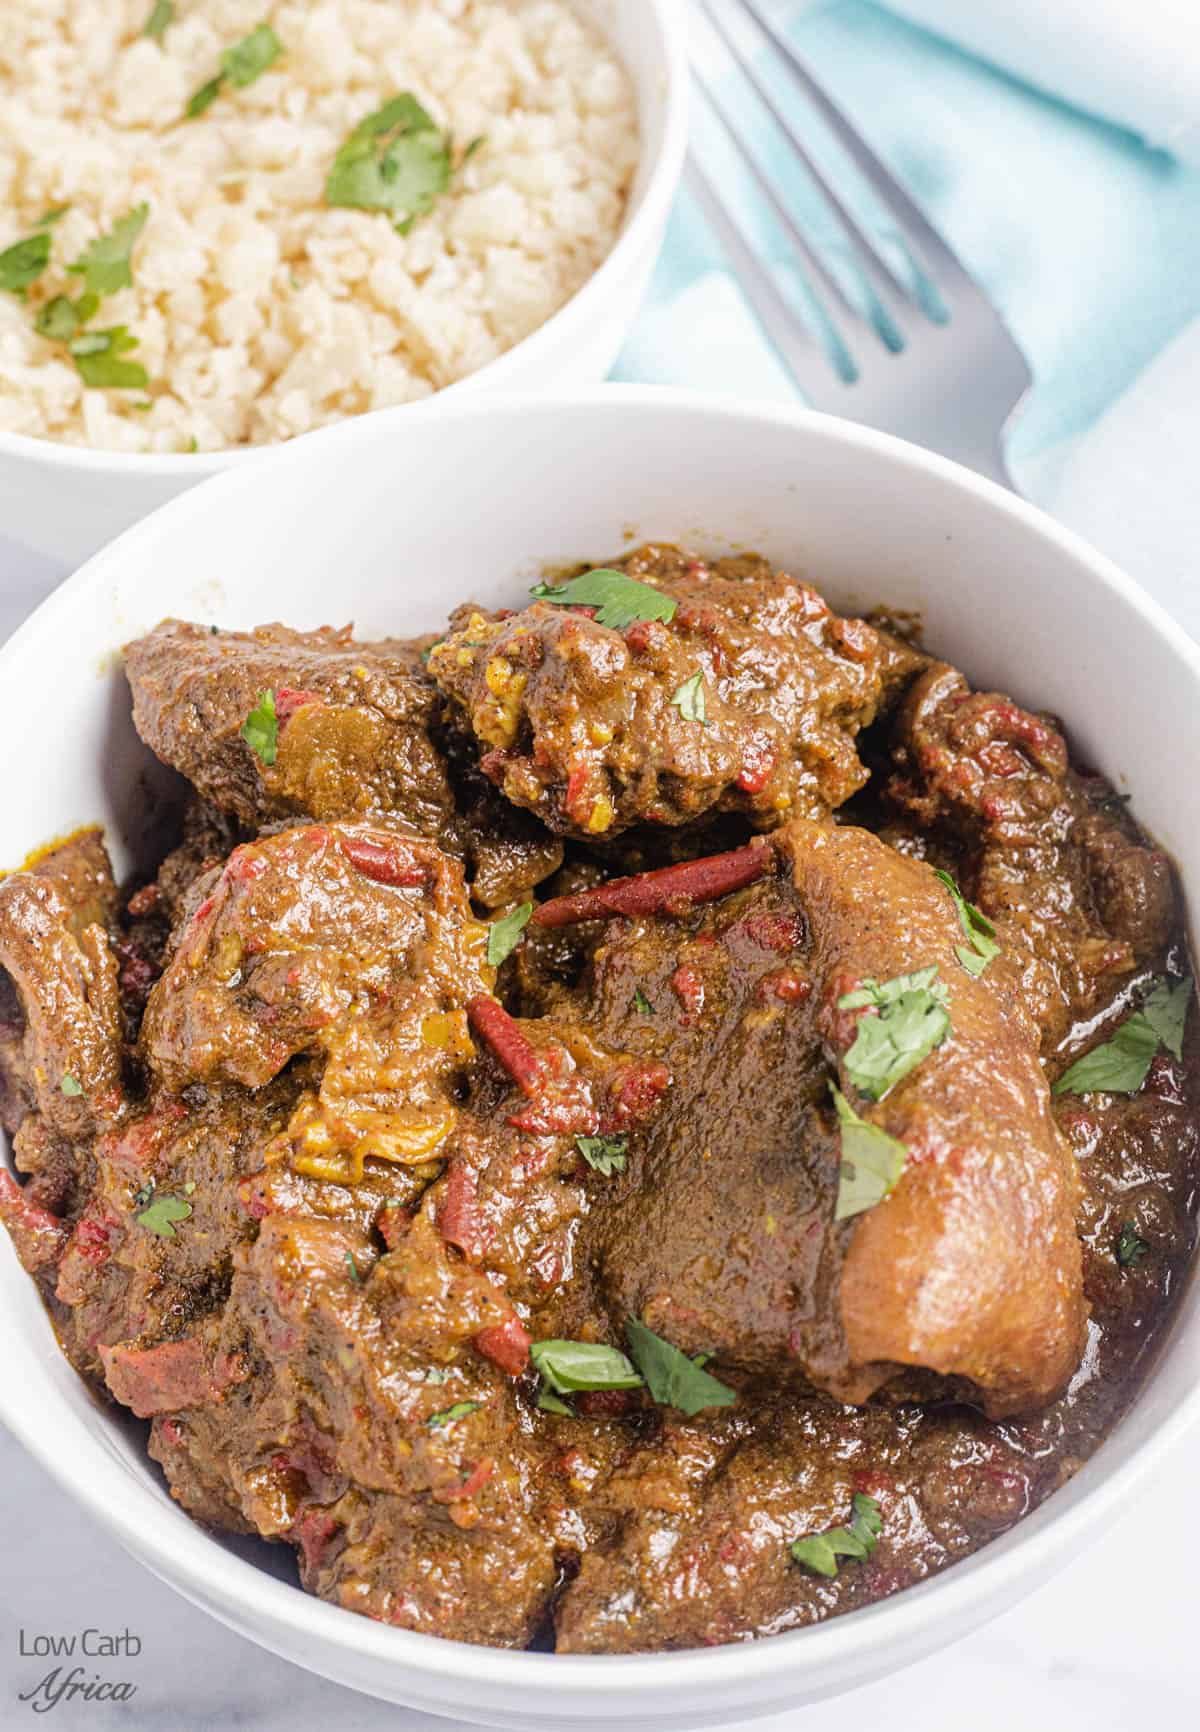 Goat curry low carb instant pot recipe.